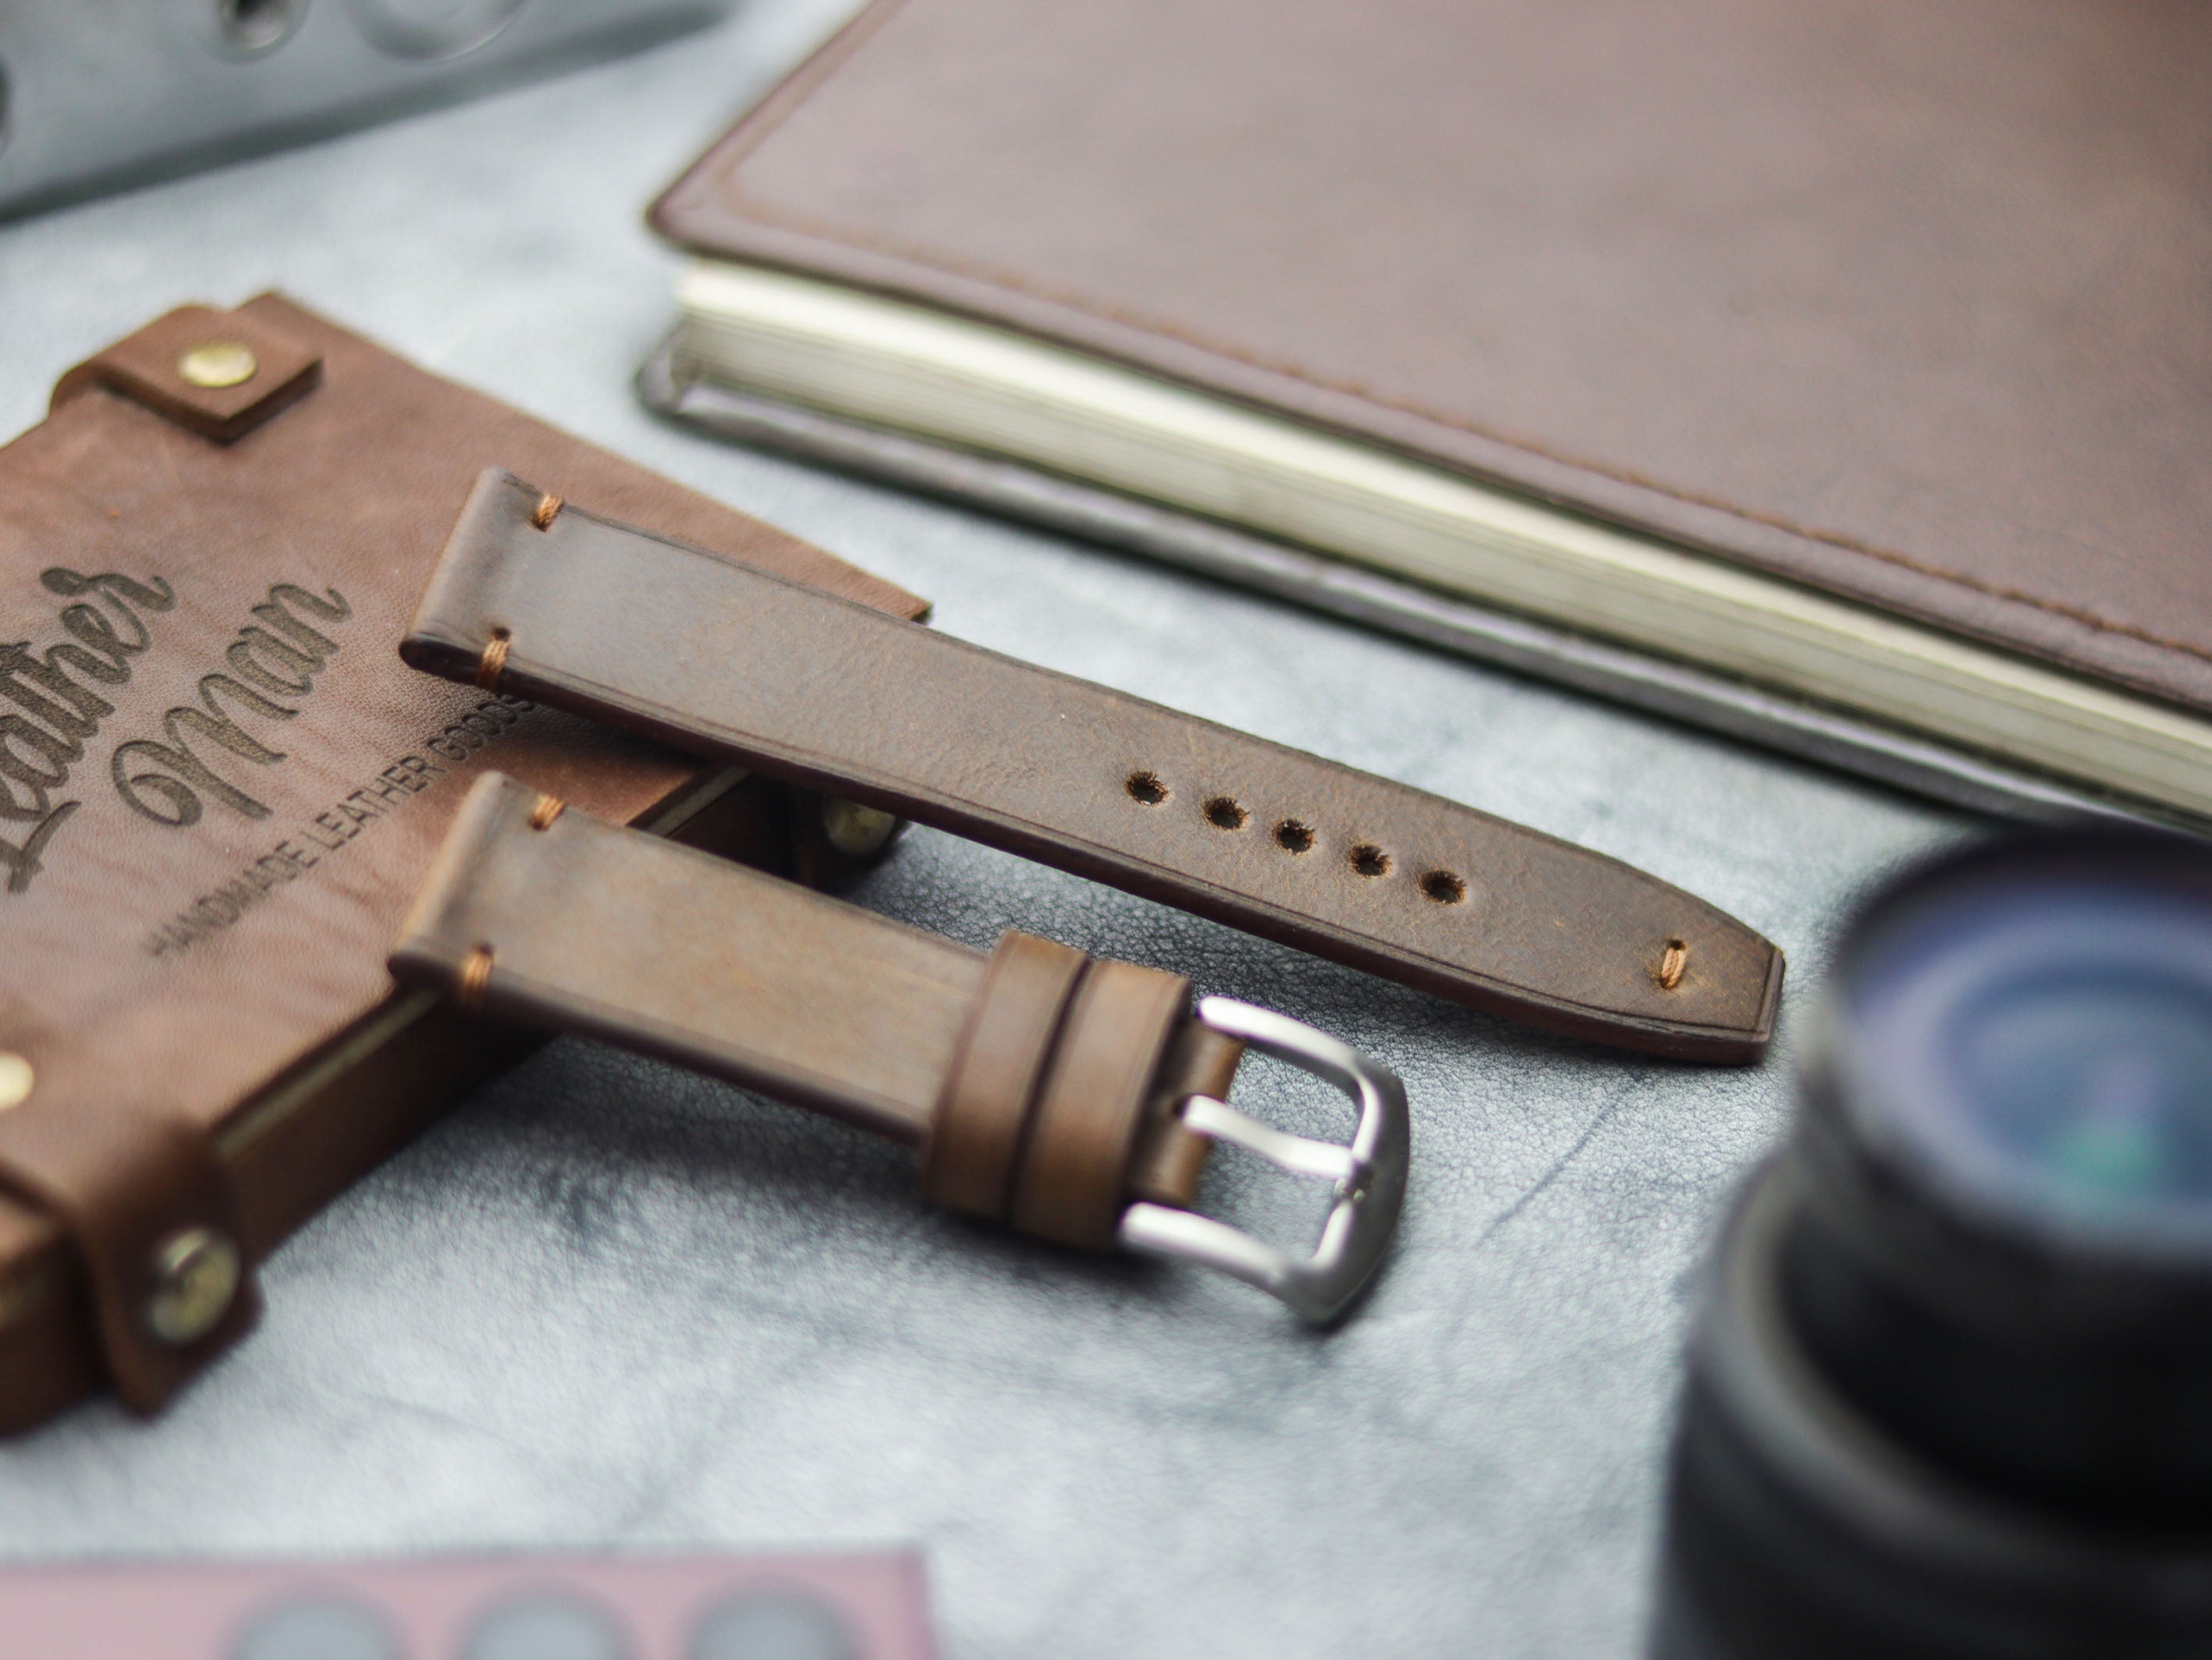 WOOD BROWN HAND-CRAFTED WATCH STRAPS - MINIMAL STITCHED